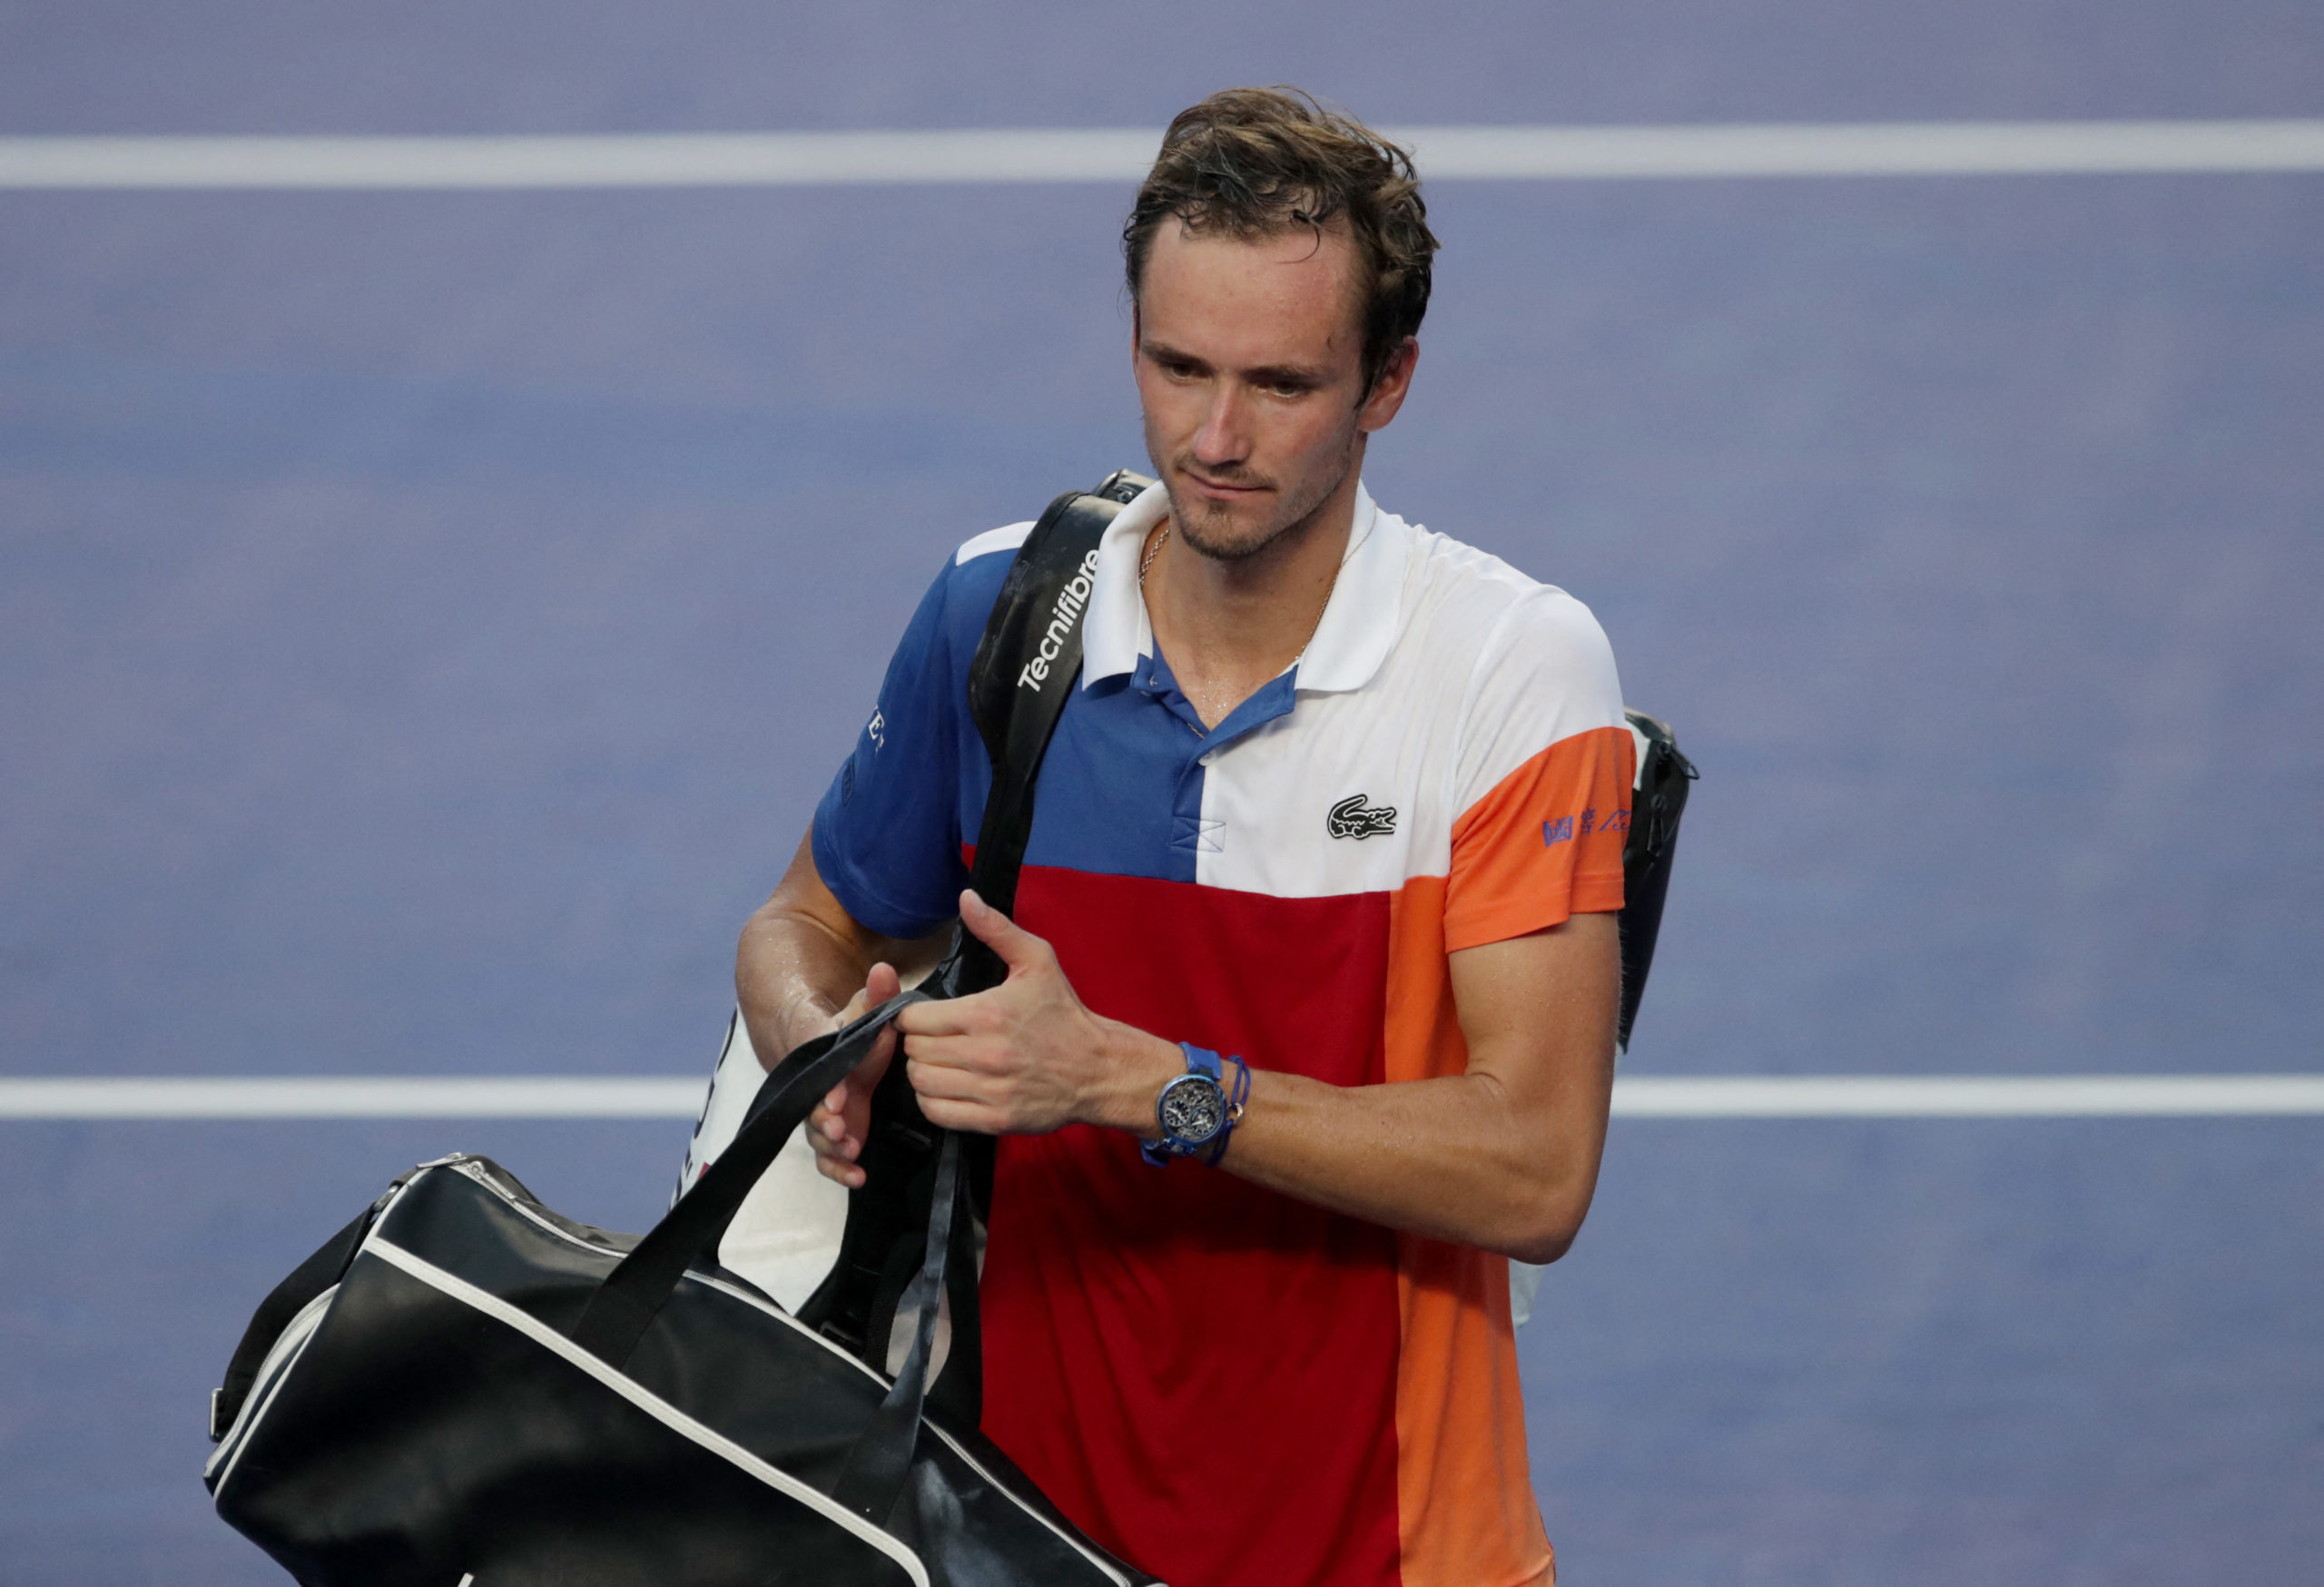 Tennis - ATP 500 - Abierto Mexicano - The Fairmont Acapulco Princess, Acapulco, Mexico - February 24, 2022 Russia's Daniil Medvedev leaves court after winning his quarter final match against Japan's Yoshihito Nishioka 